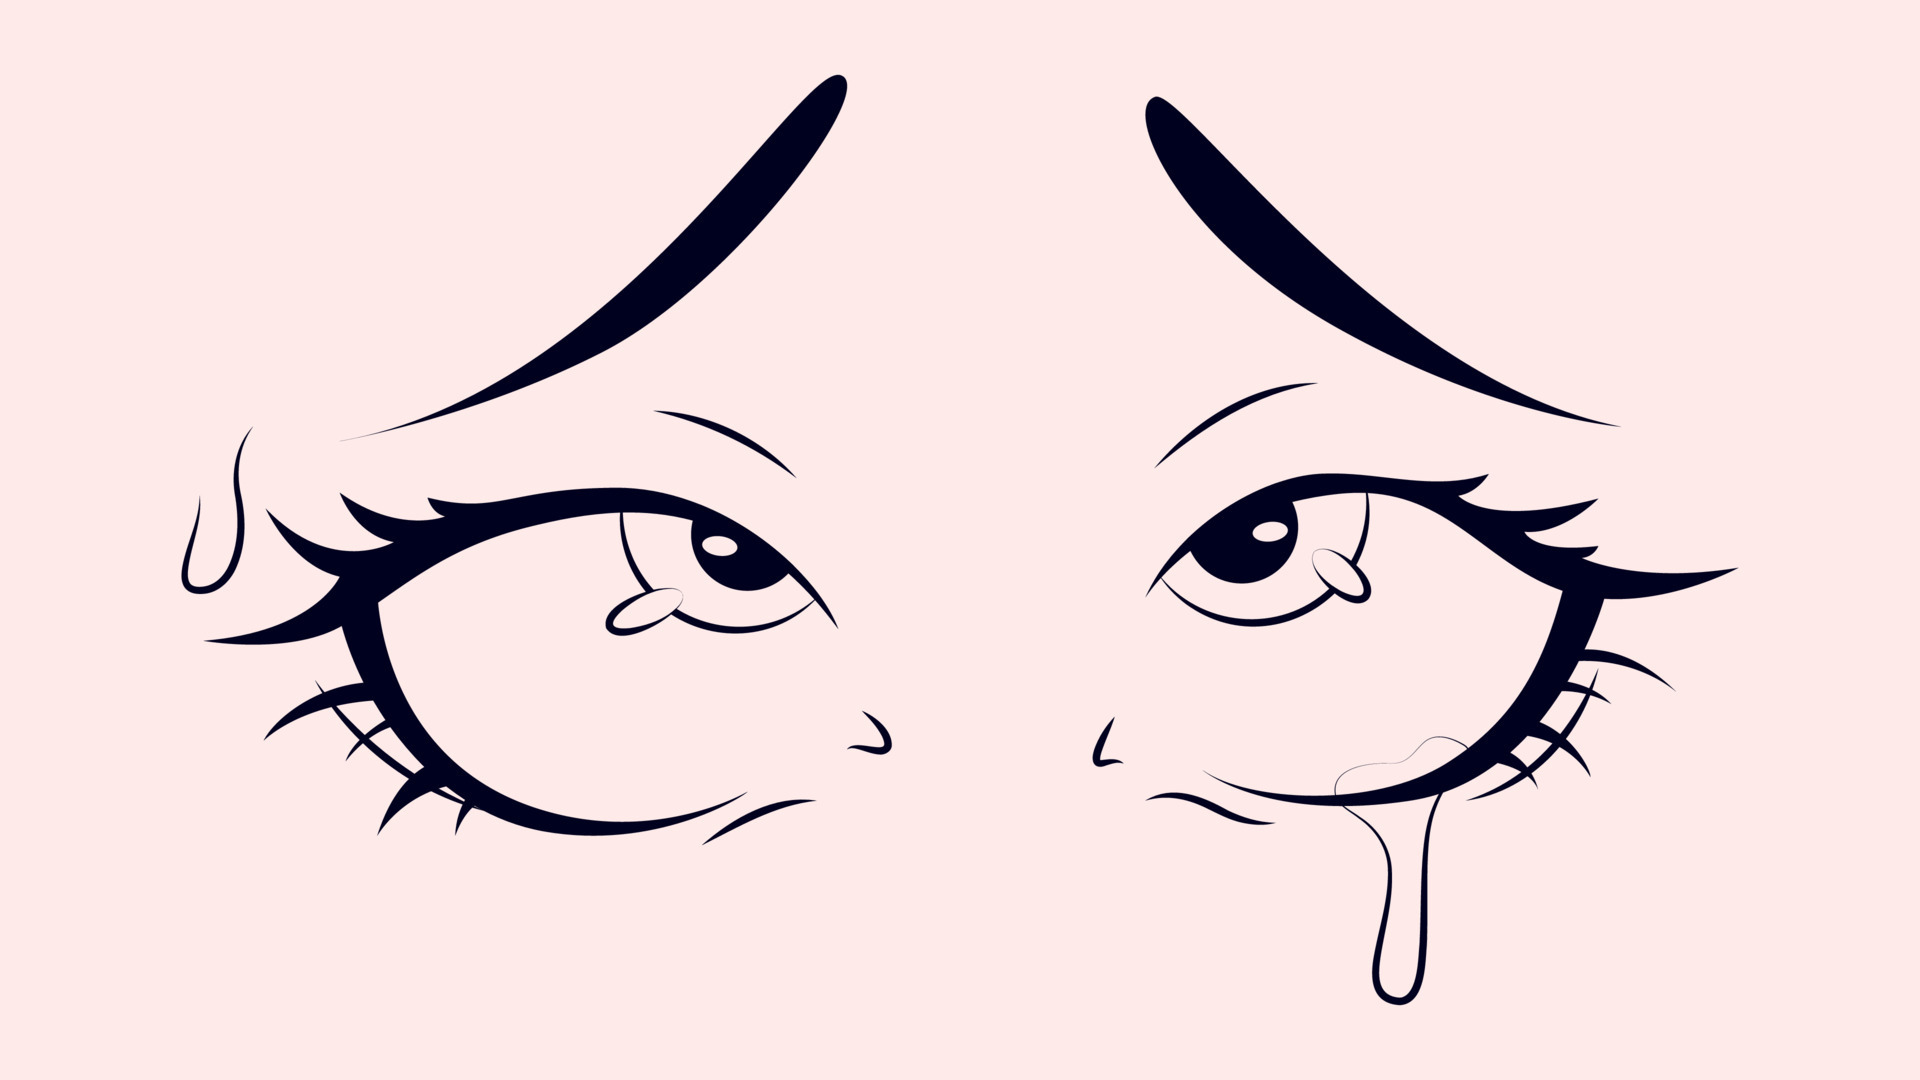 Anime Eye Assets By Coulden2017dx - Cute Anime Eyes Closed Transparent PNG  - 1213x659 - Free Download on NicePNG